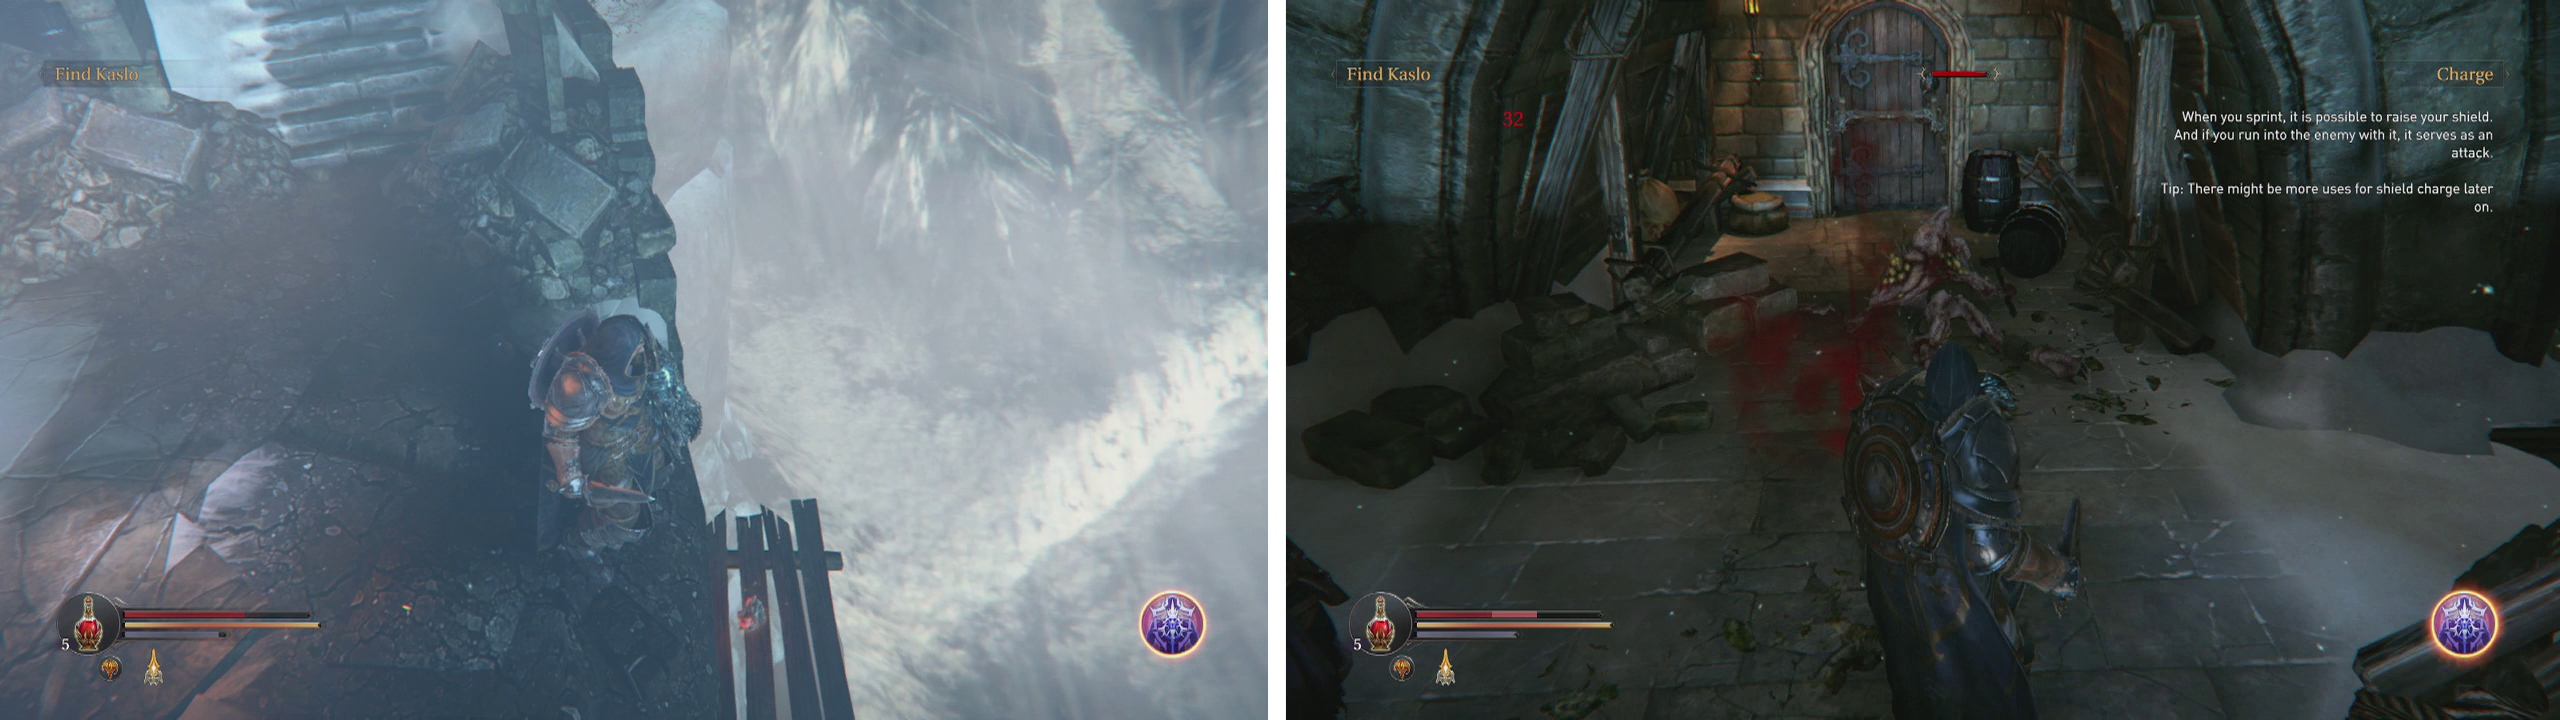 From the room with the Maruader drop down to the ledge with the Tower Key (left). Continue along the outer pathway here, kill the Crossbowman and Infected and use the key to open the door (right).